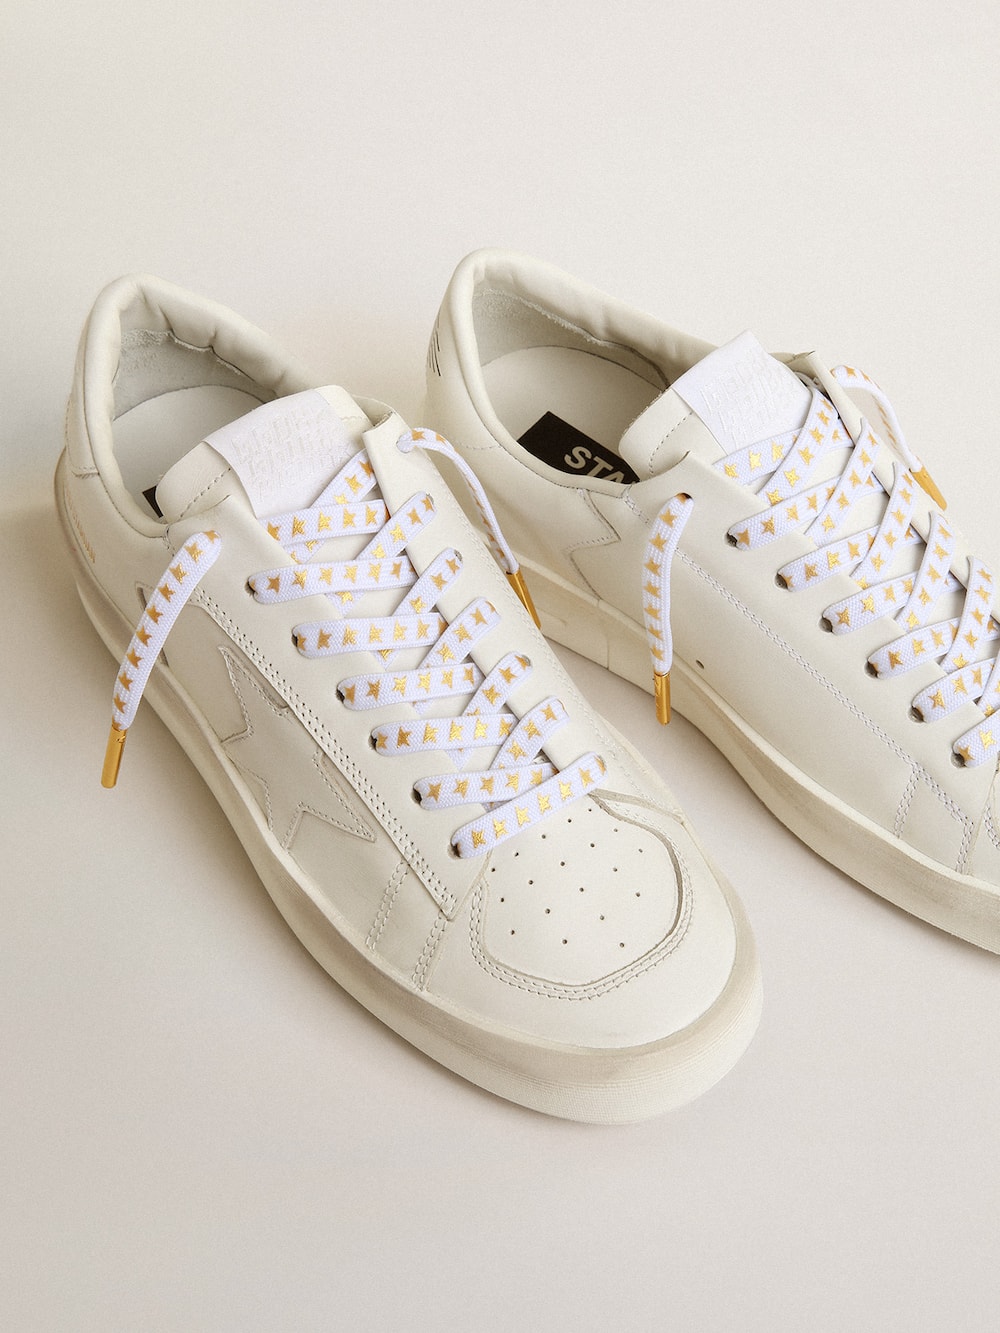 Golden Goose - White laces with gold stars in 